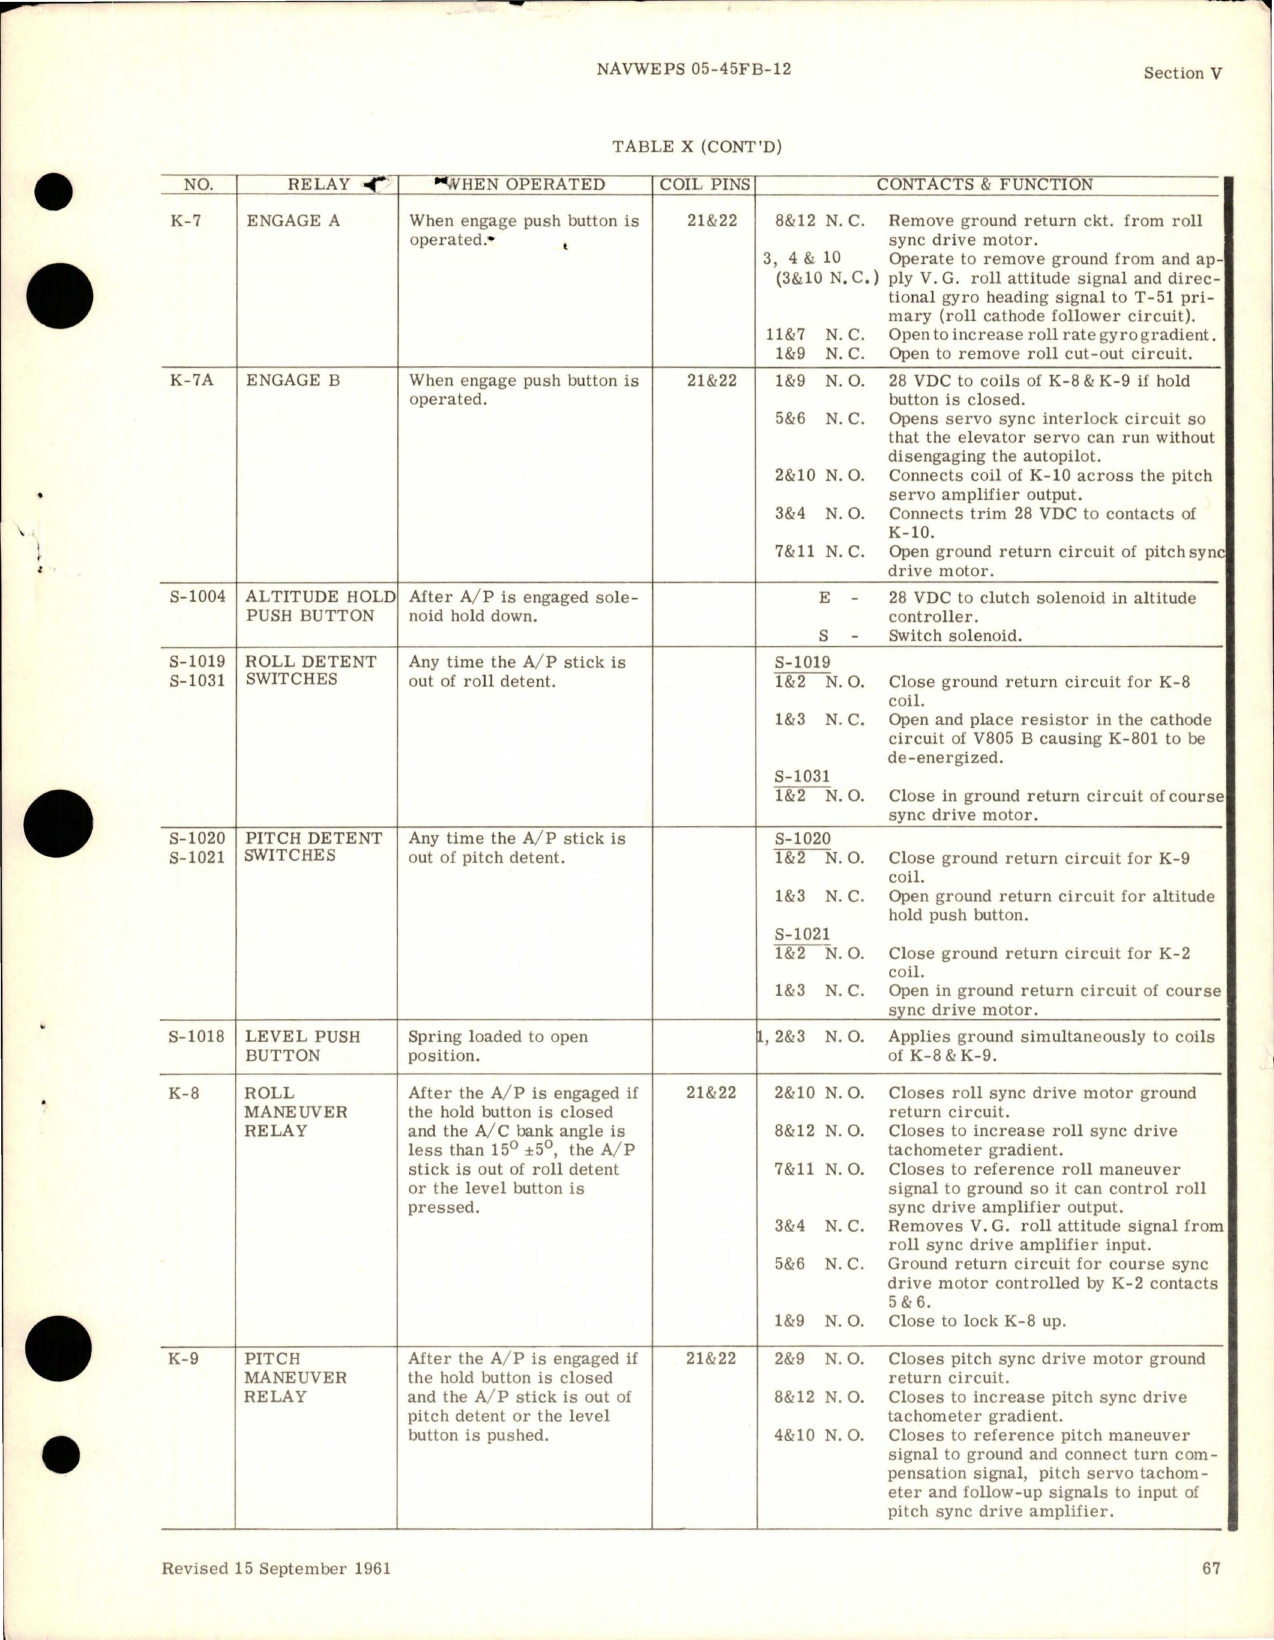 Sample page 5 from AirCorps Library document: Operation and Service Instructions for G3H Automatic Pilot - Model 2CJ4D1 